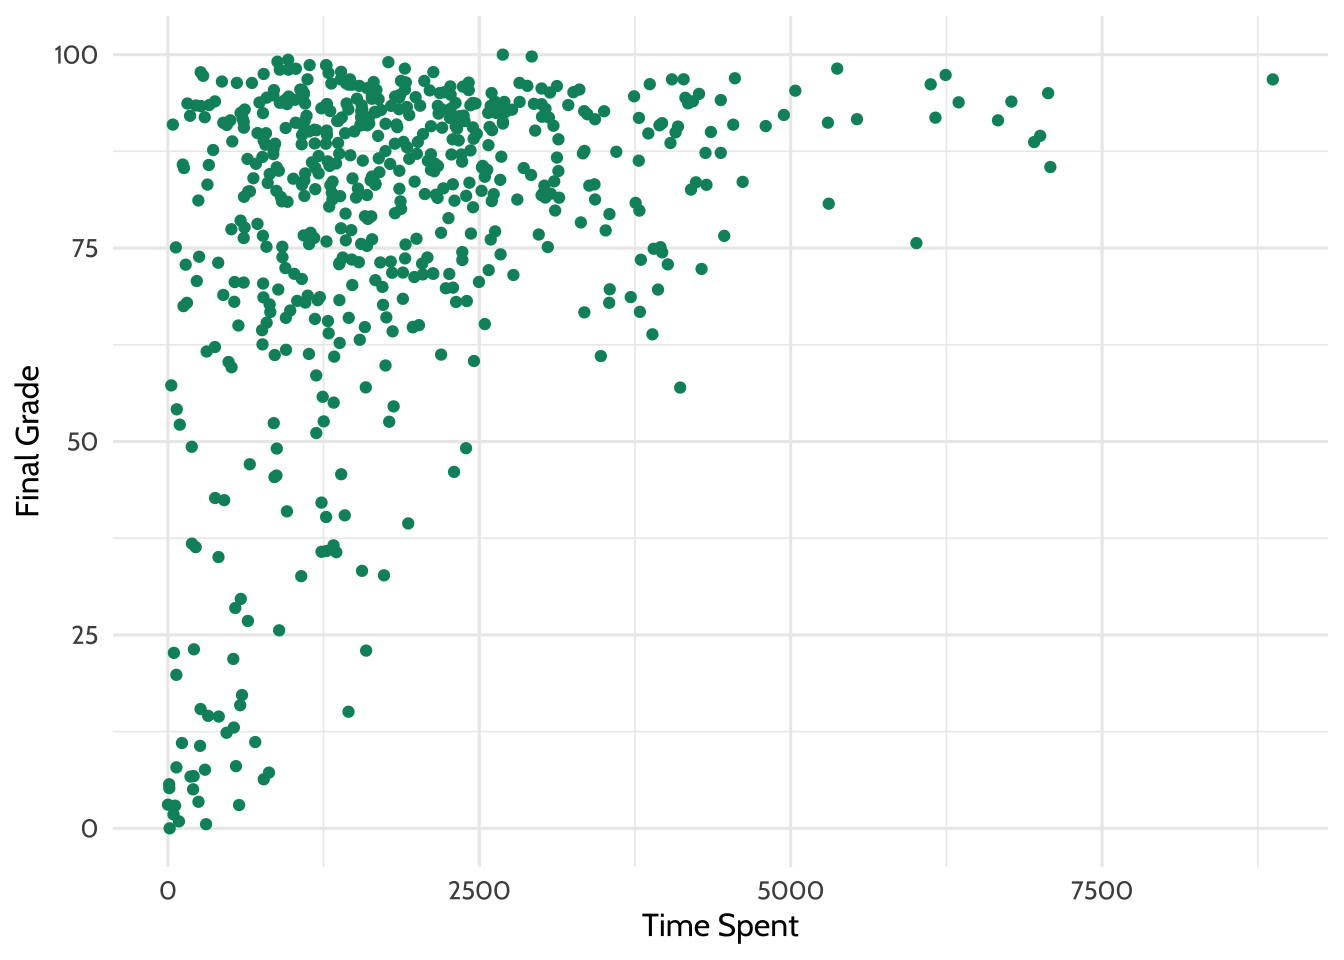 Scatterplot of Time Spent versus Final Grade with heavy concentration of dots on low time spent and high final grades